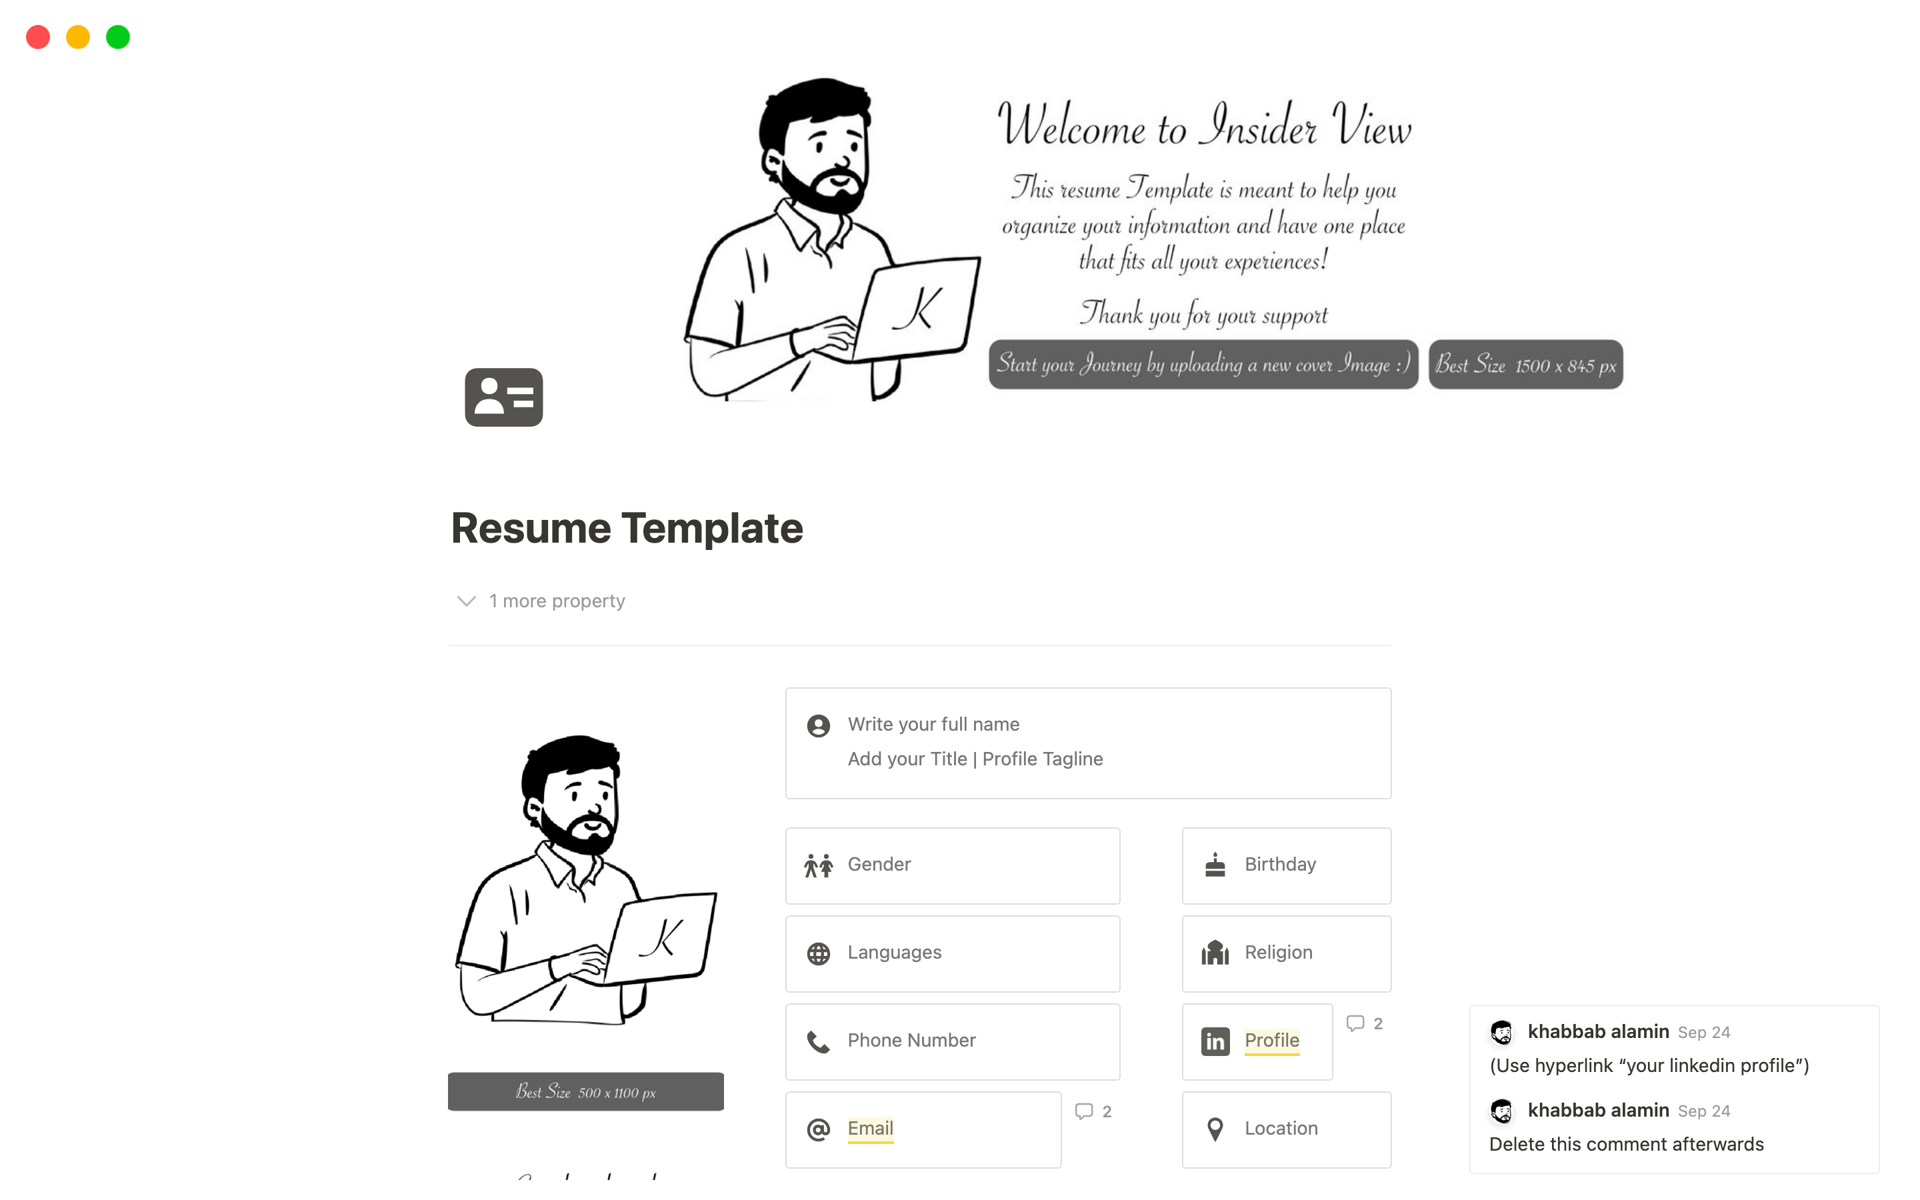 A template preview for Resume-Insider View